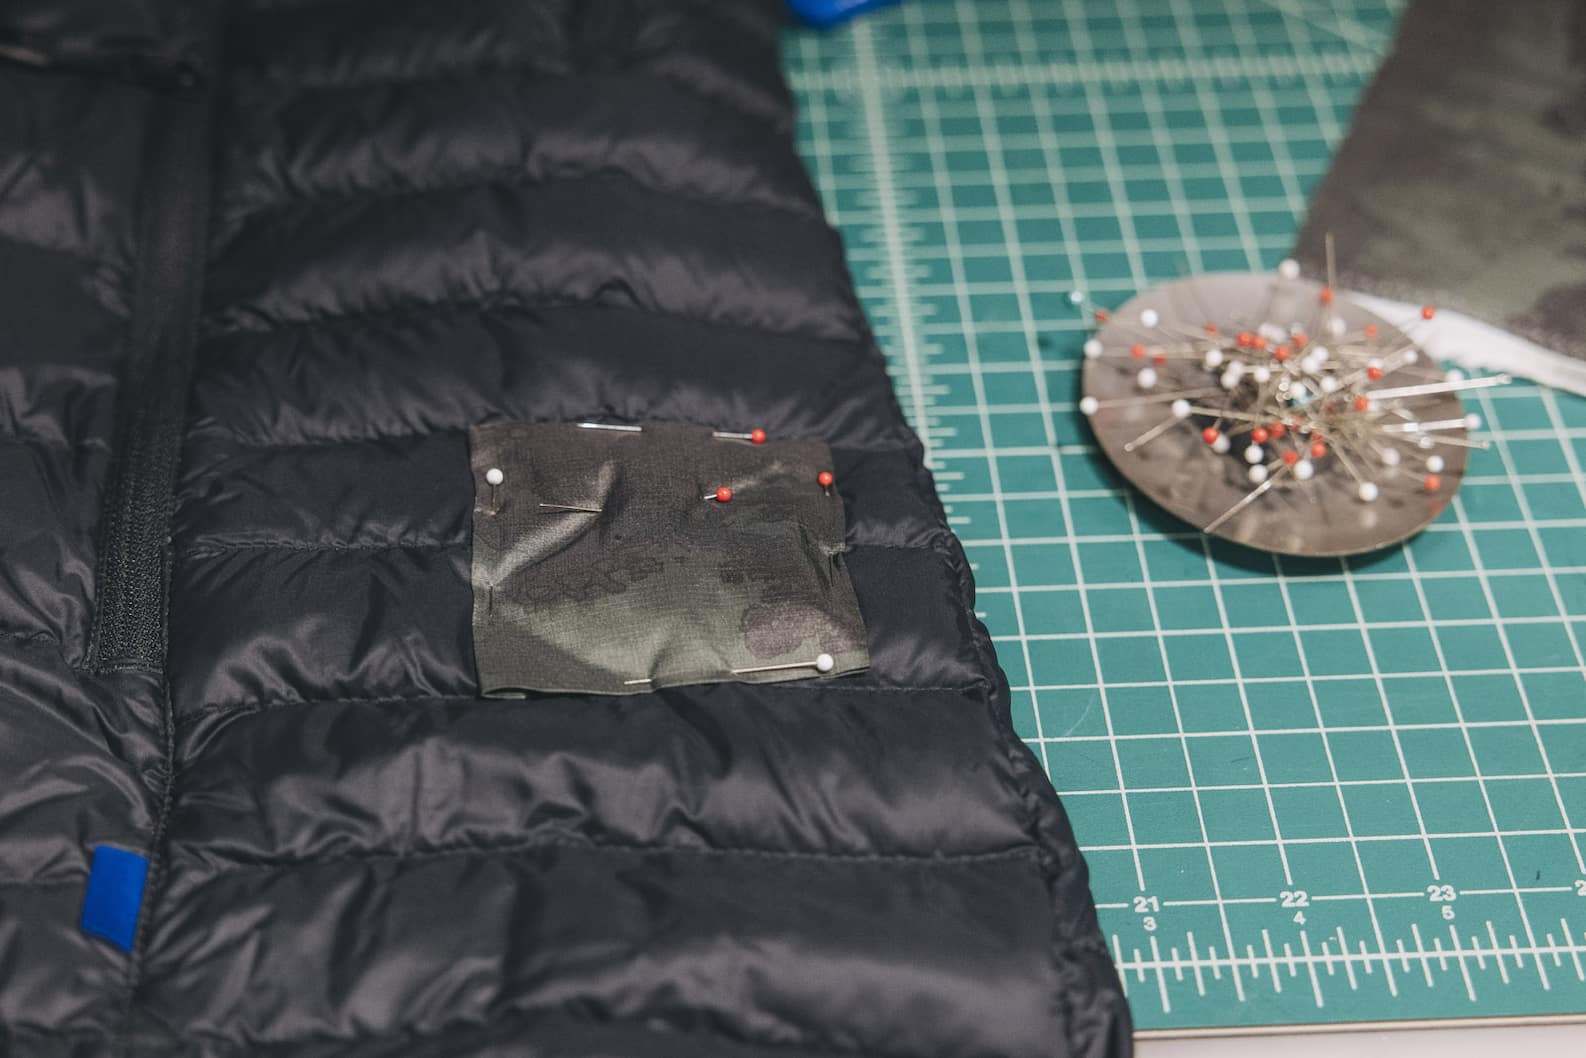 Got a hole in a puffer jacket? Here is how to easily patch it up